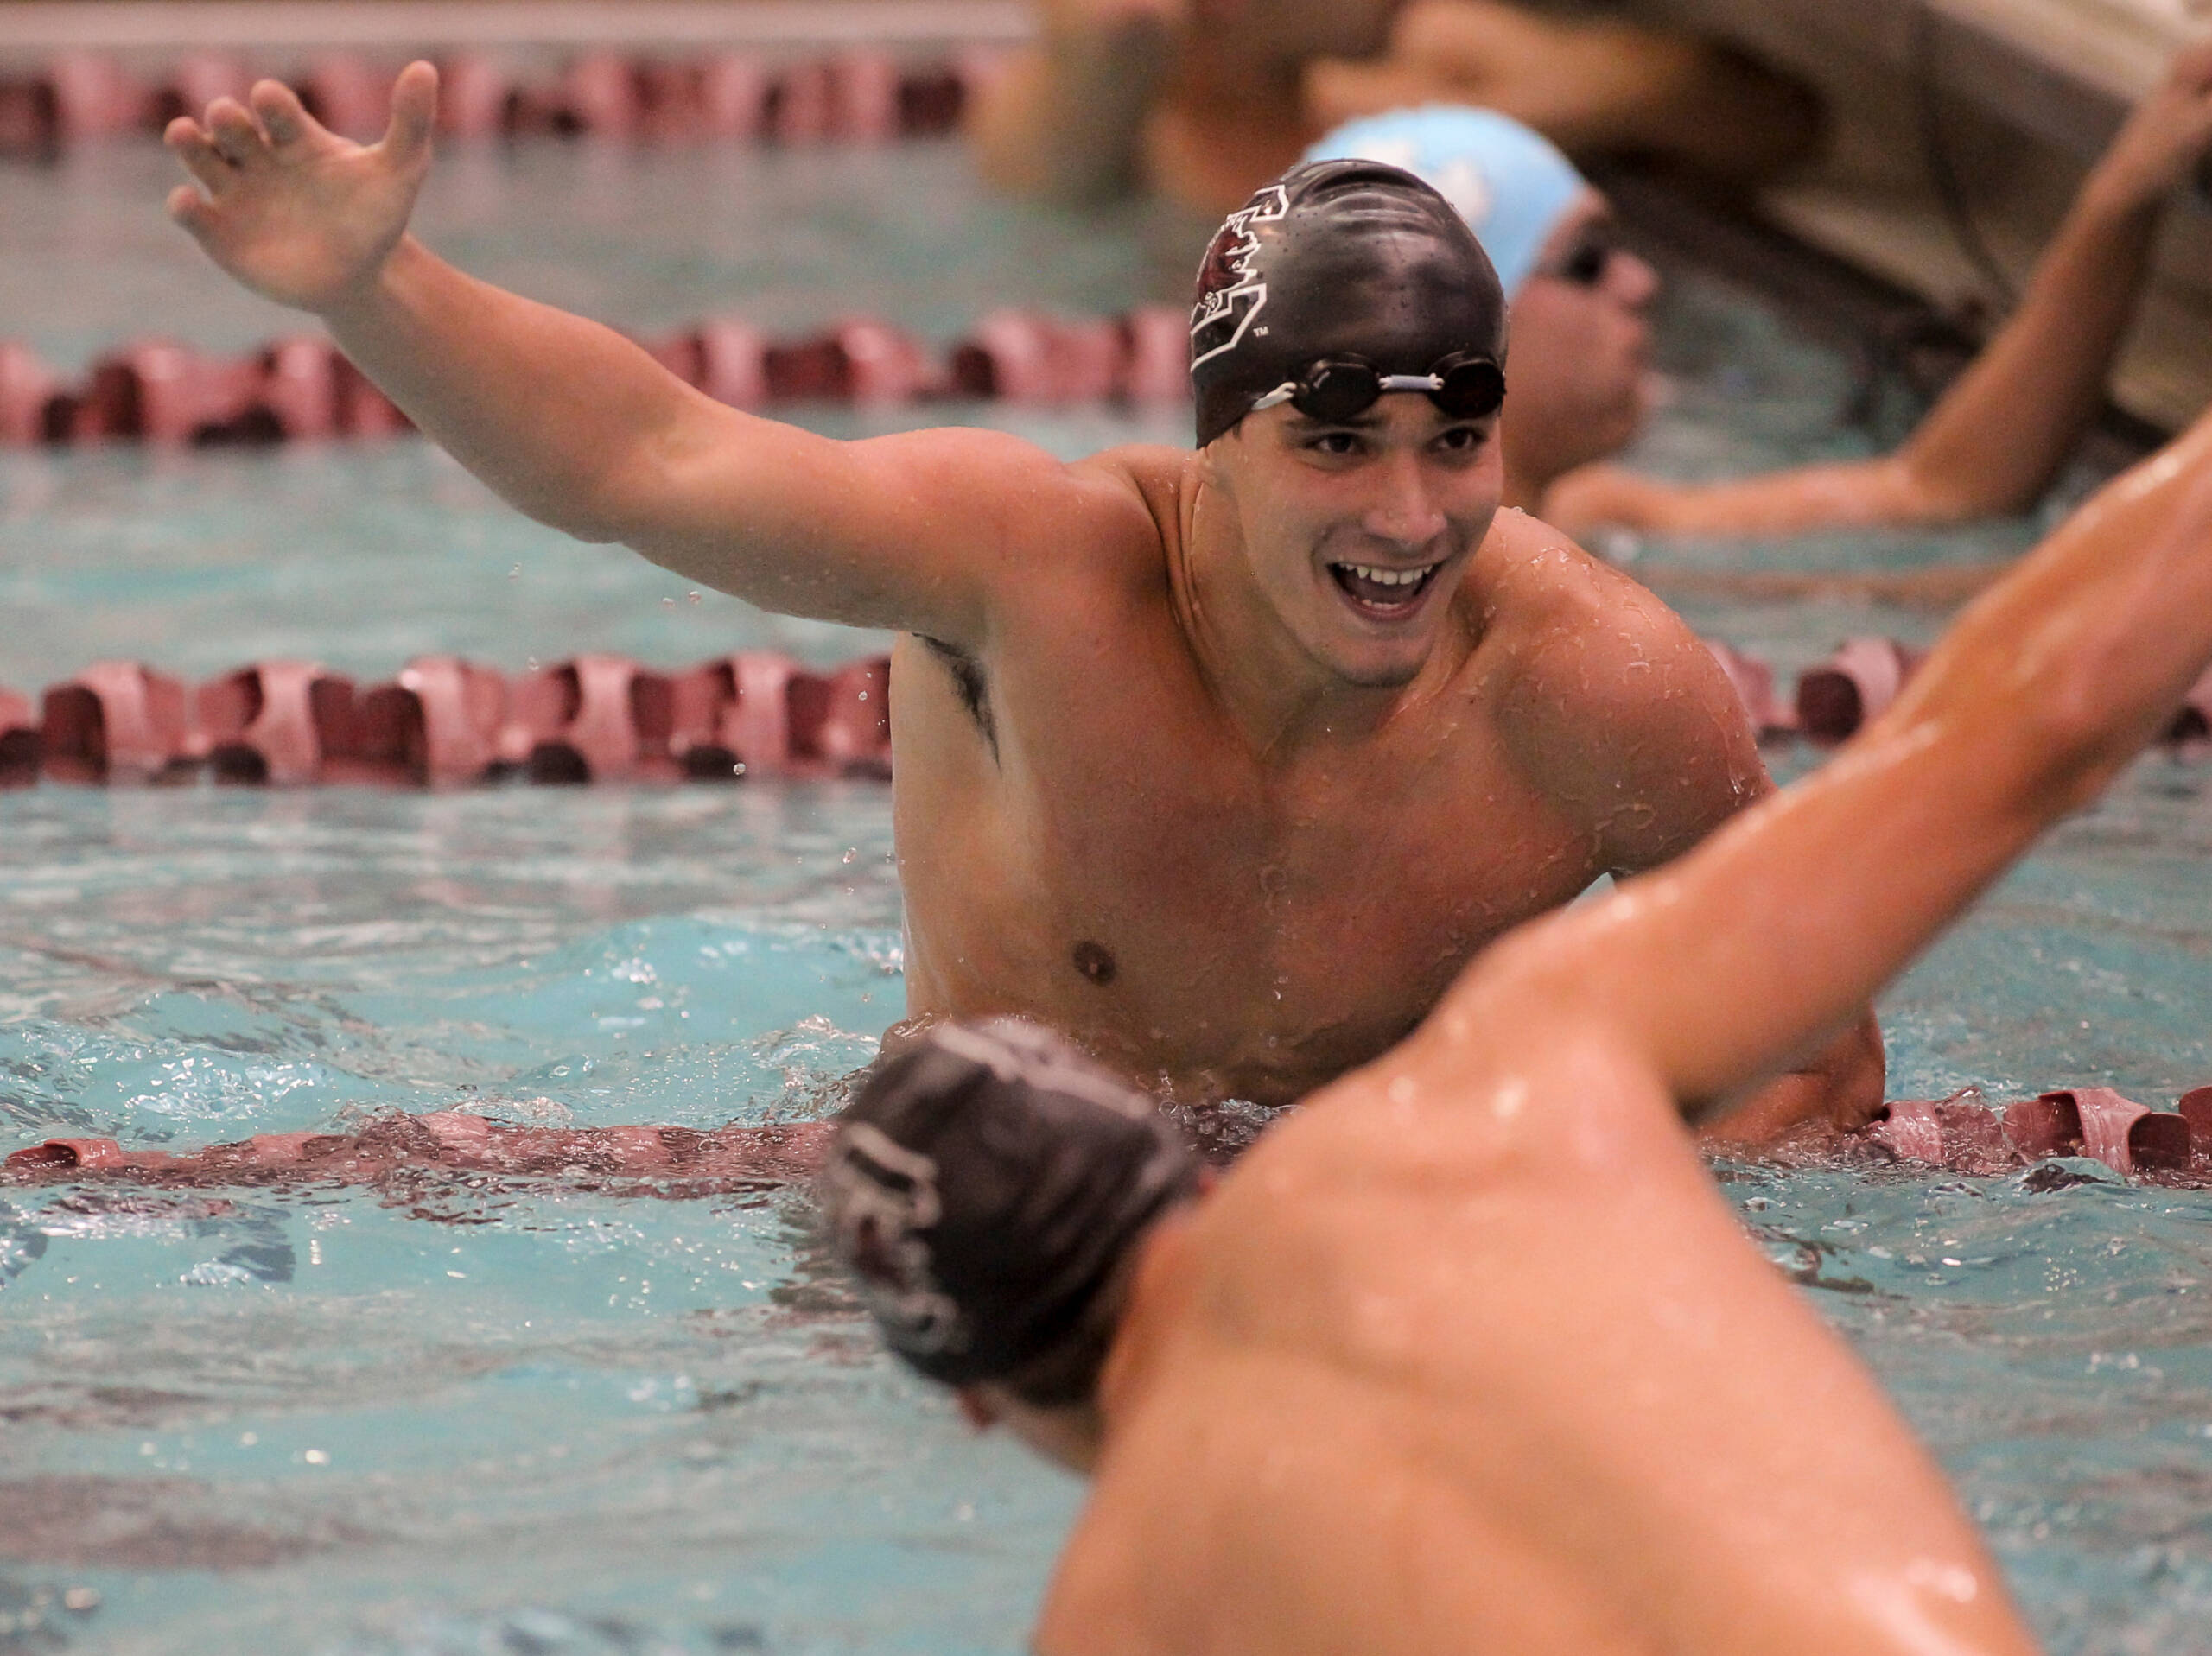 Gamecocks Grab Spots in the CollegeSwimming Top 50